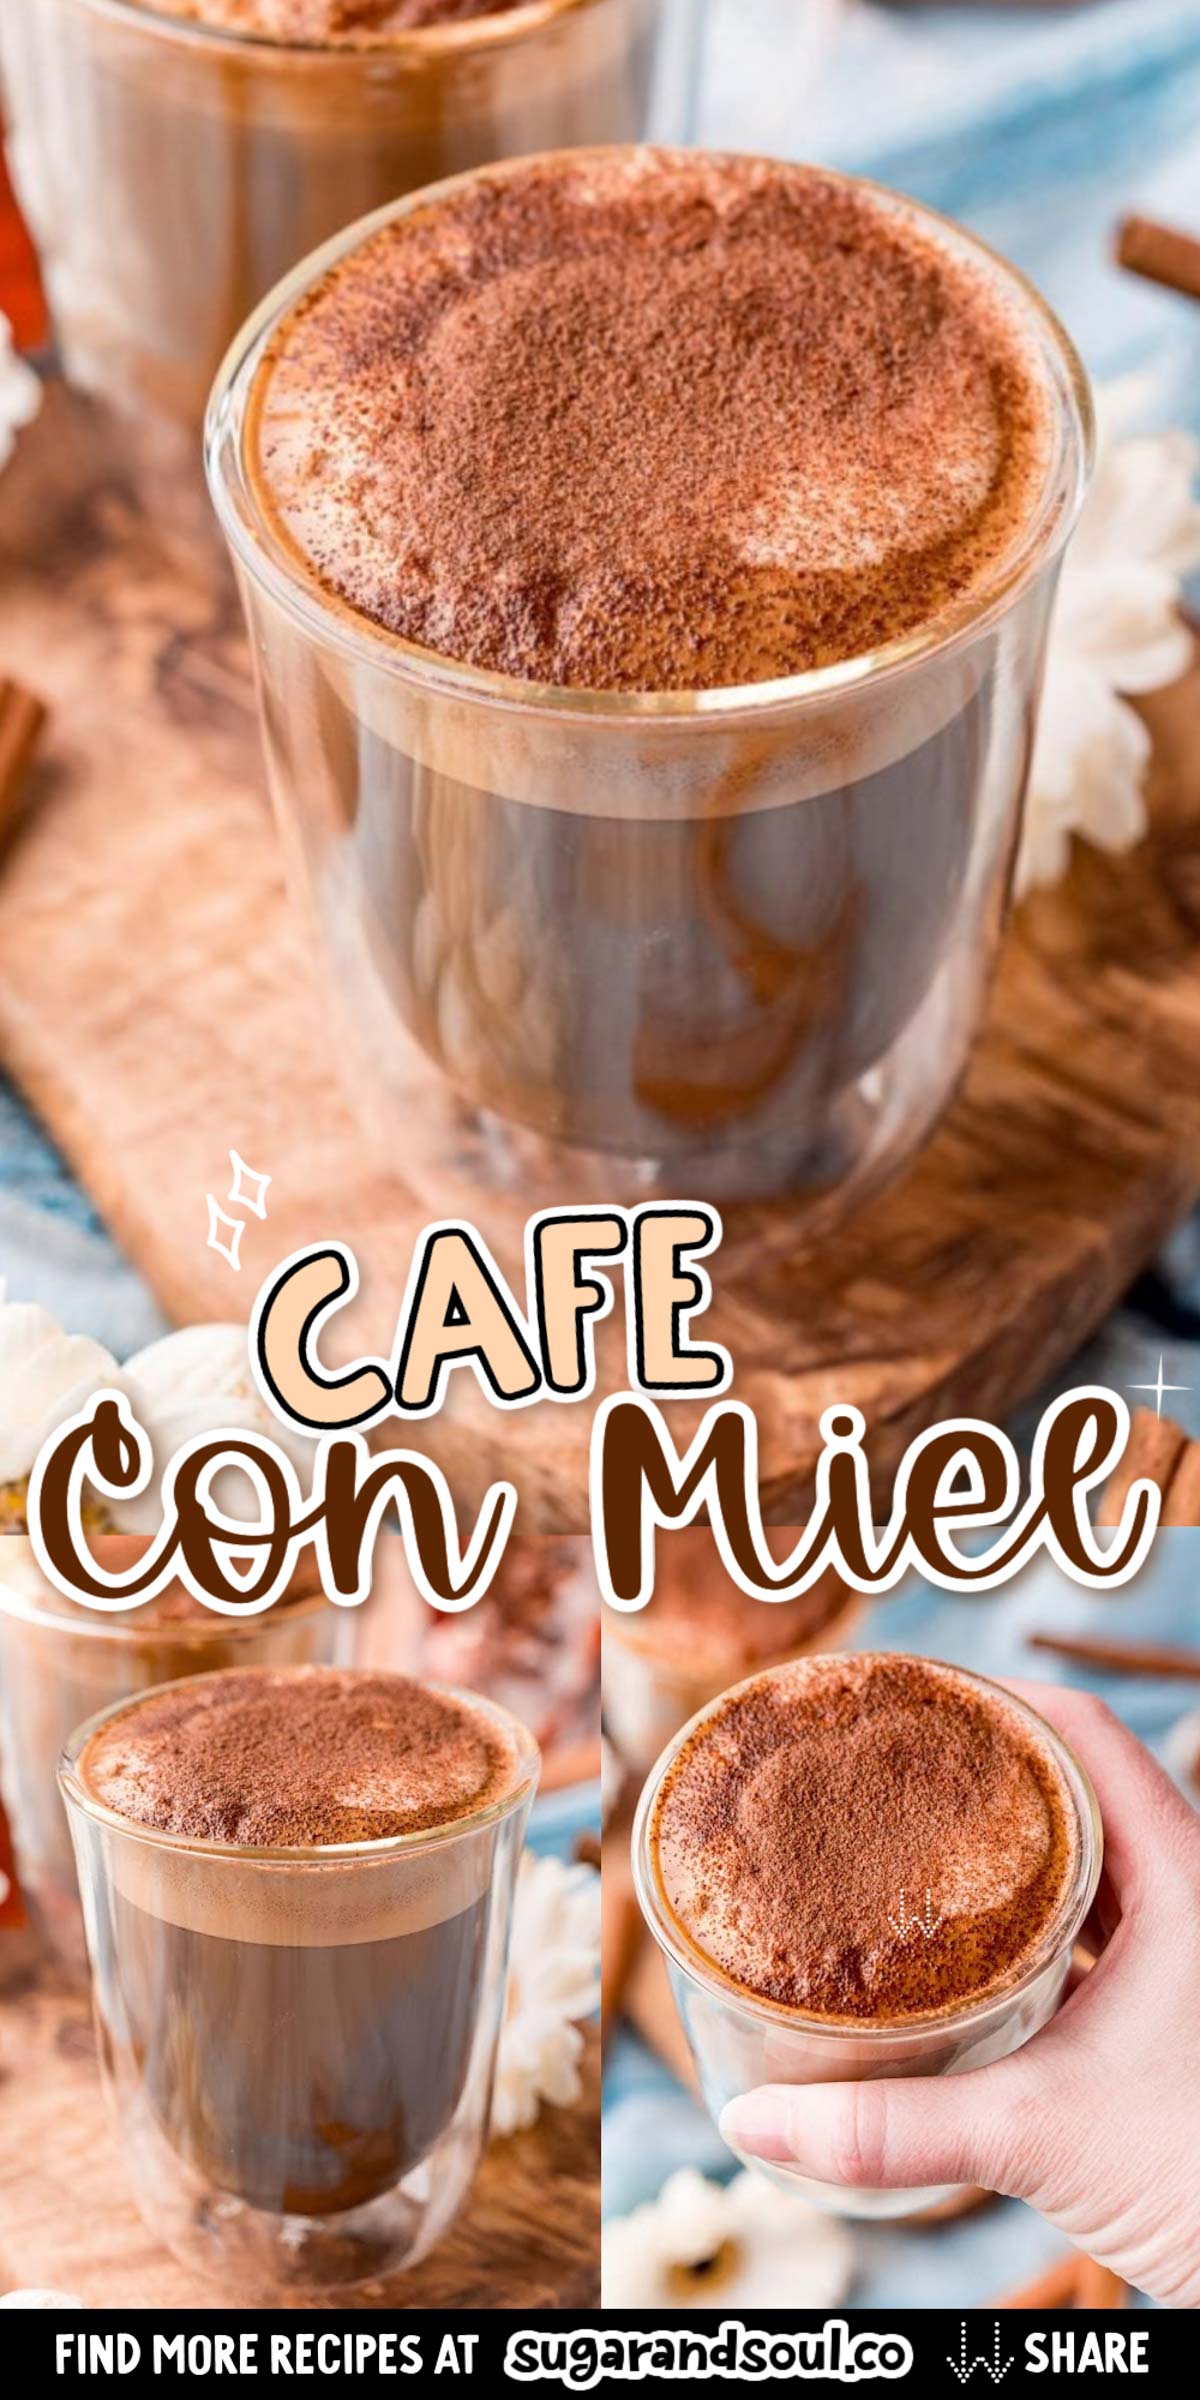 Cafe con Miel (Spanish Coffee With Honey) is made of espresso, honey, and whole milk then finished off with a heavy sprinkle of ground cinnamon! via @sugarandsoulco